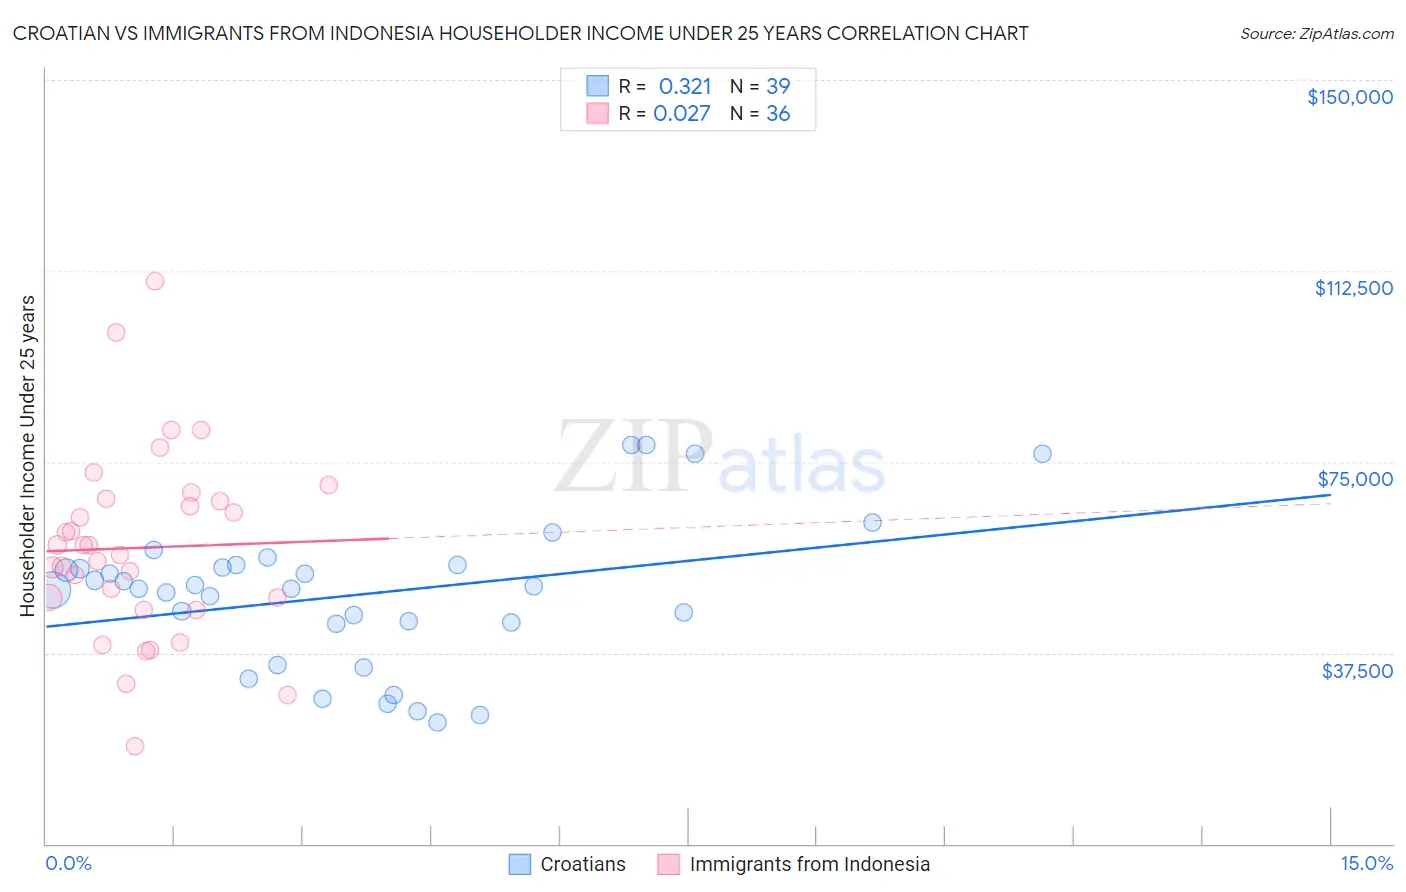 Croatian vs Immigrants from Indonesia Householder Income Under 25 years